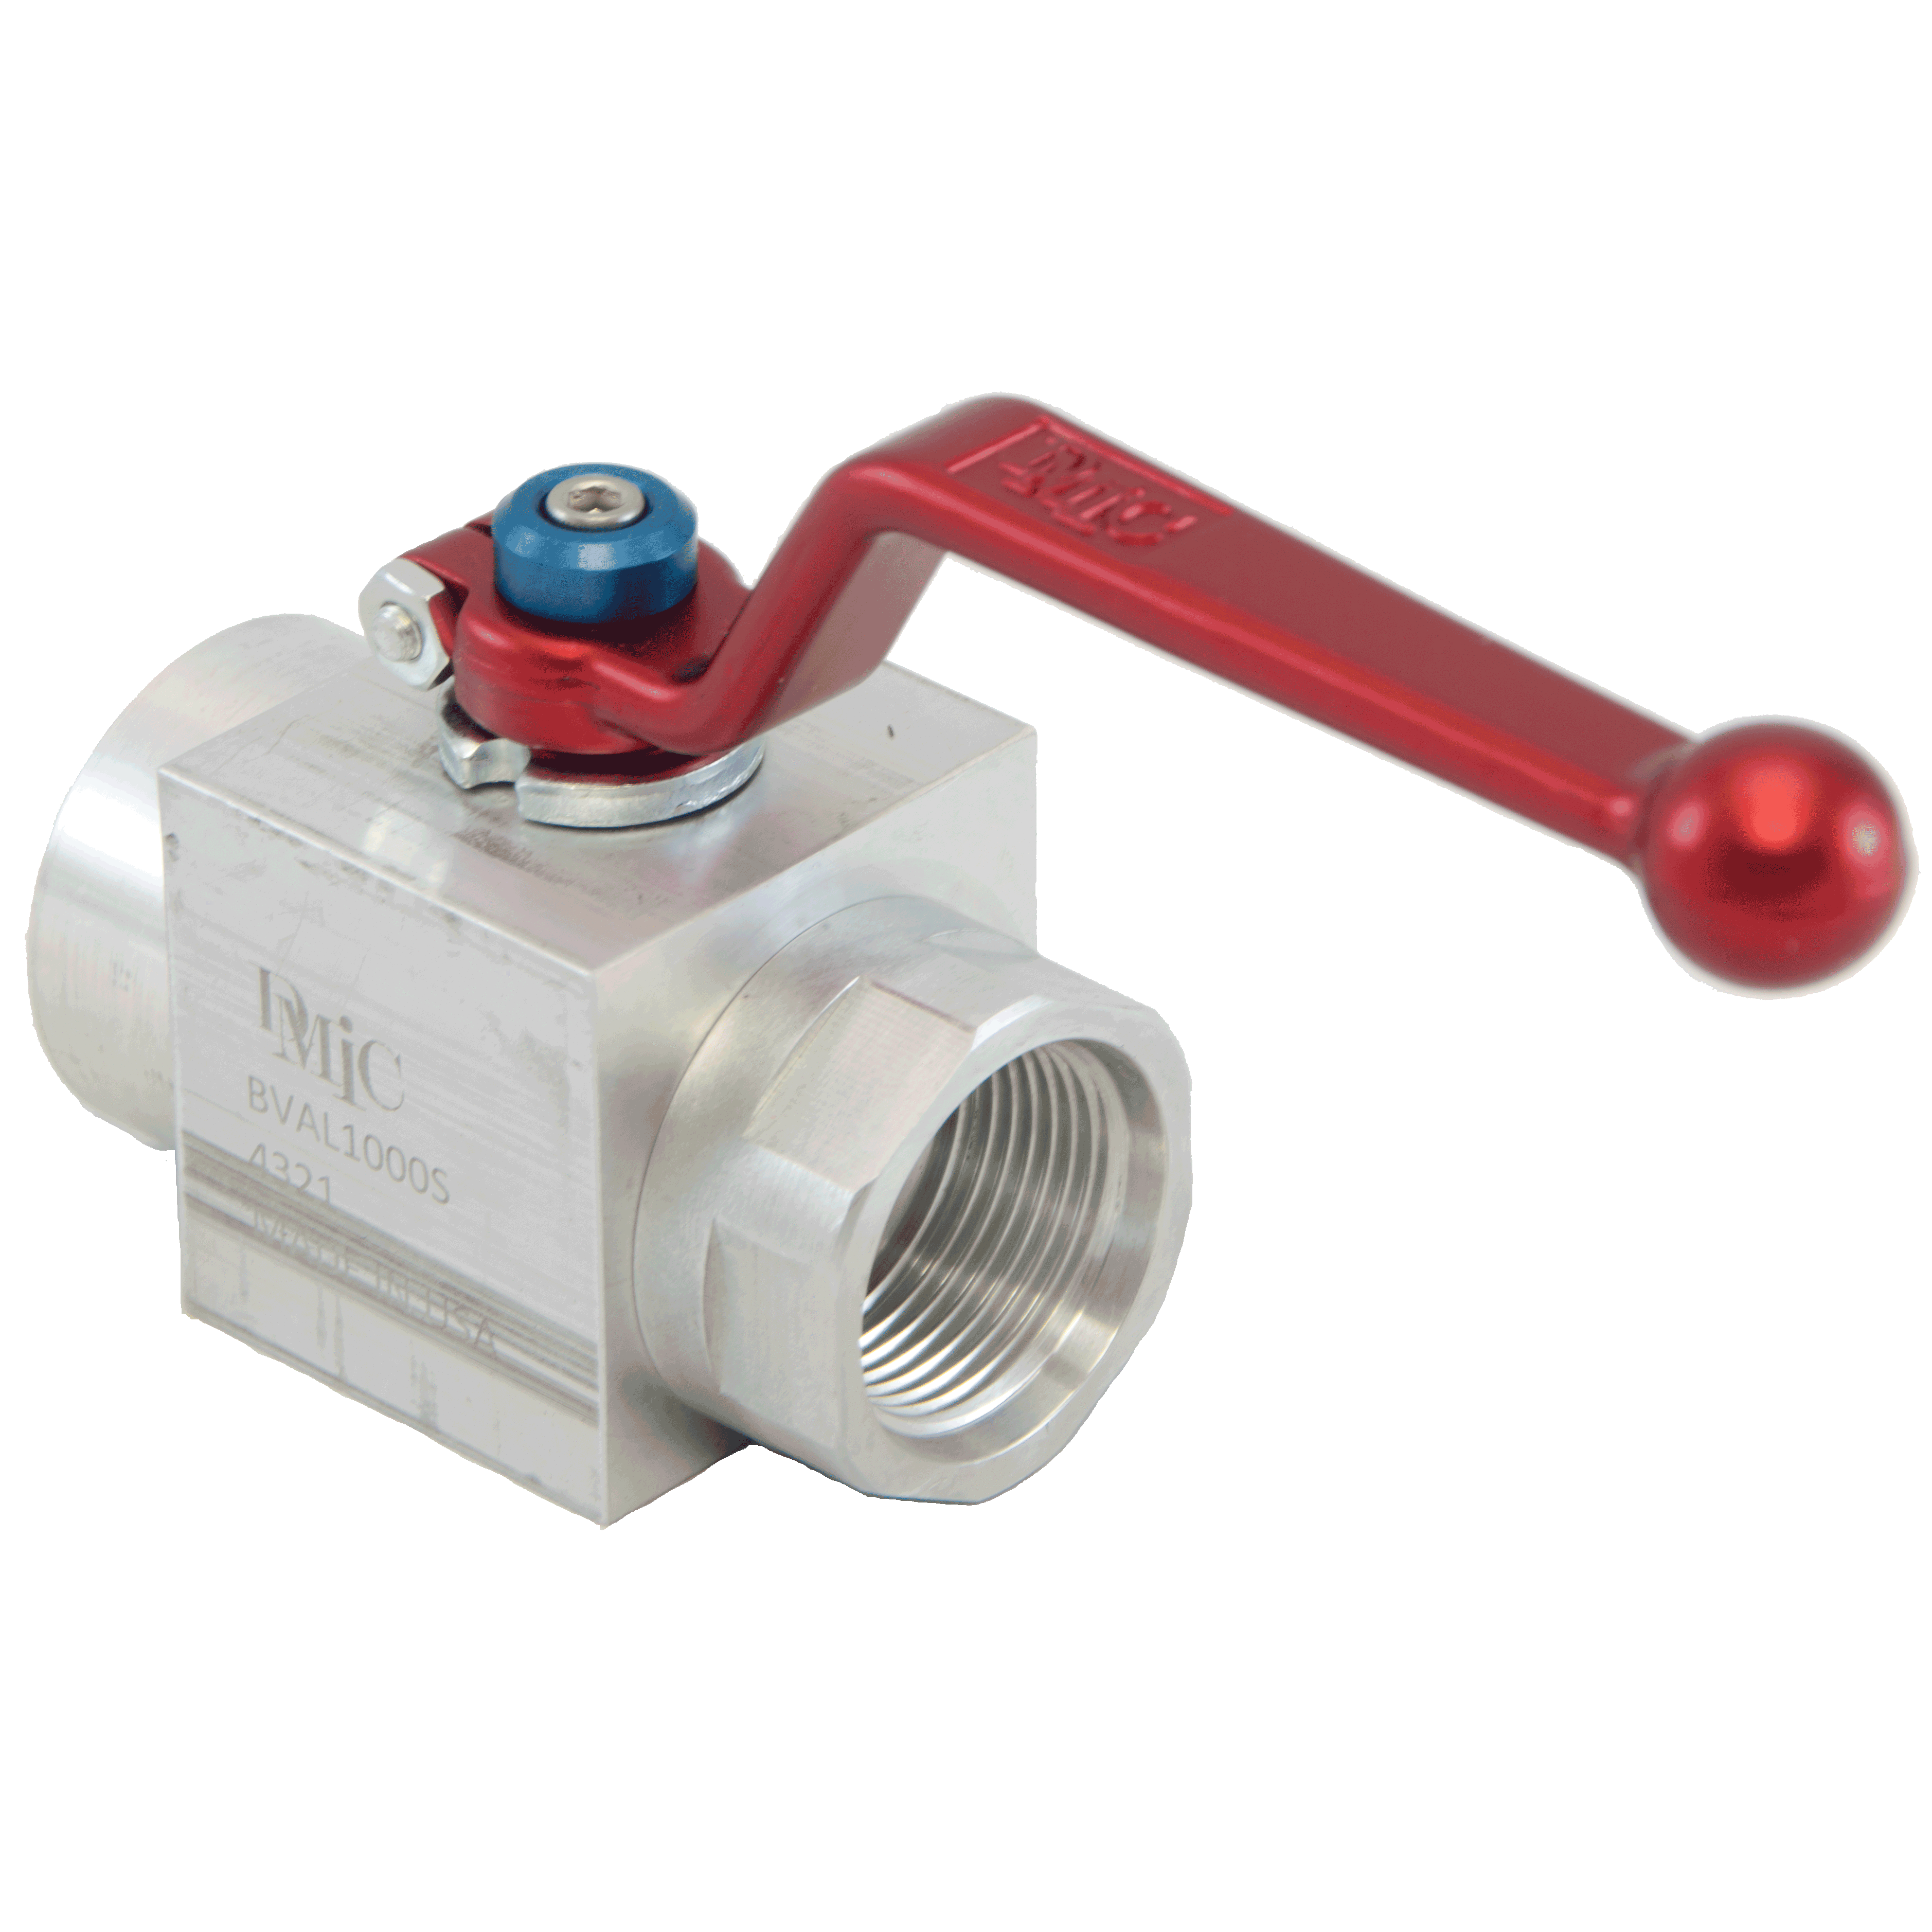 BVAL-1500S-4321 : DMIC Suction Ball Valve, #24 SAE (1/2), Aluminum, 600psi, Two-Way